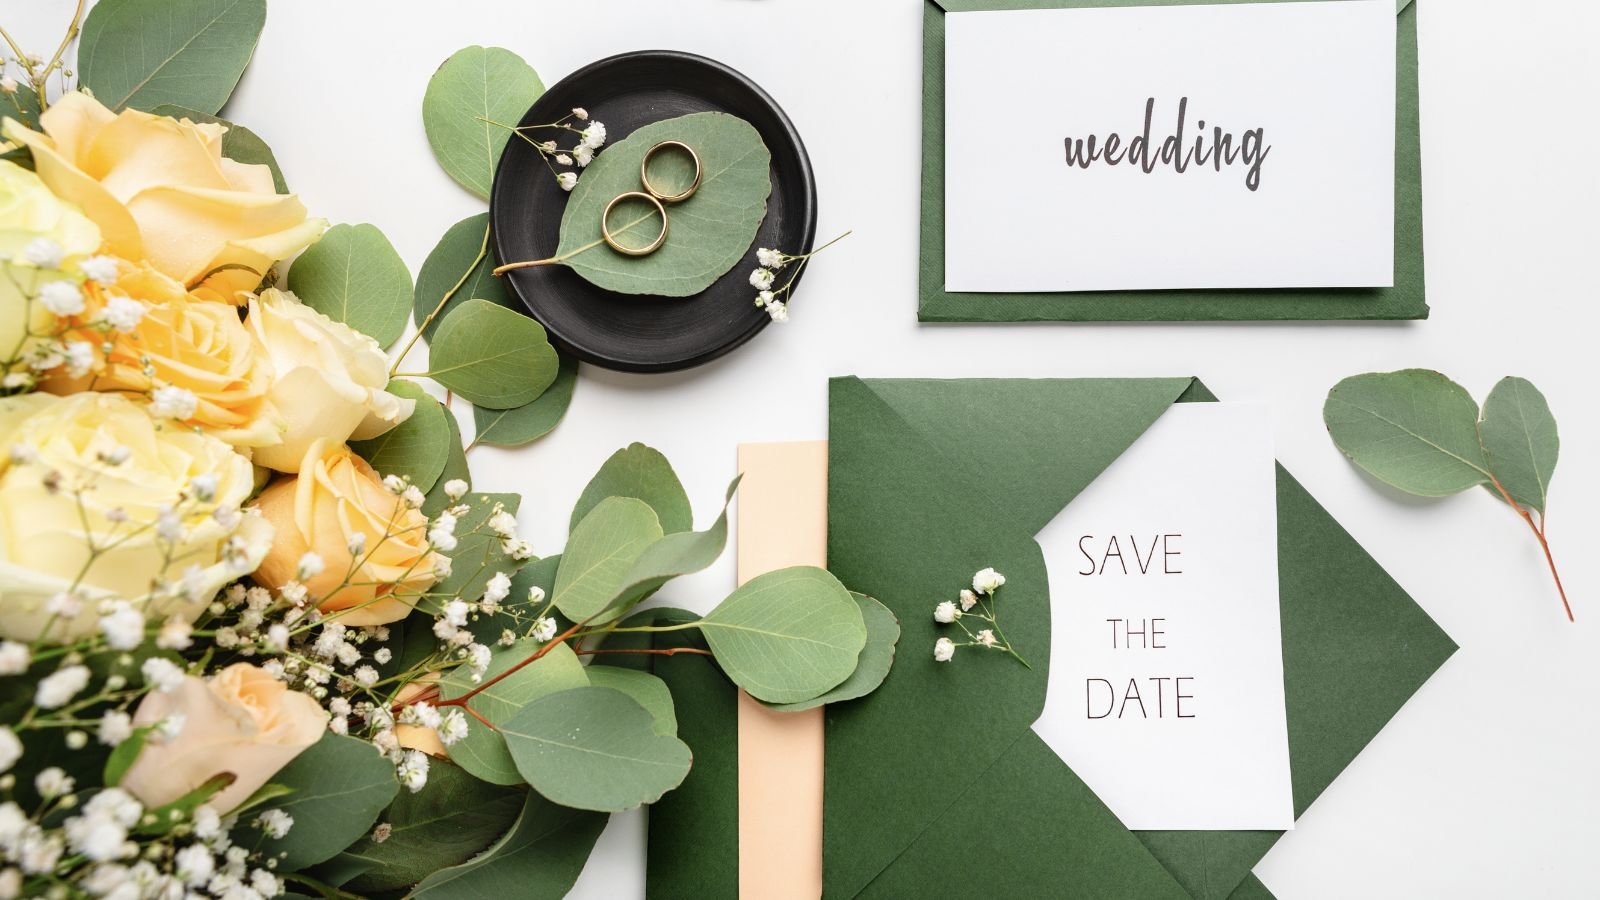 How to Address Your Save-the-Date Envelopes